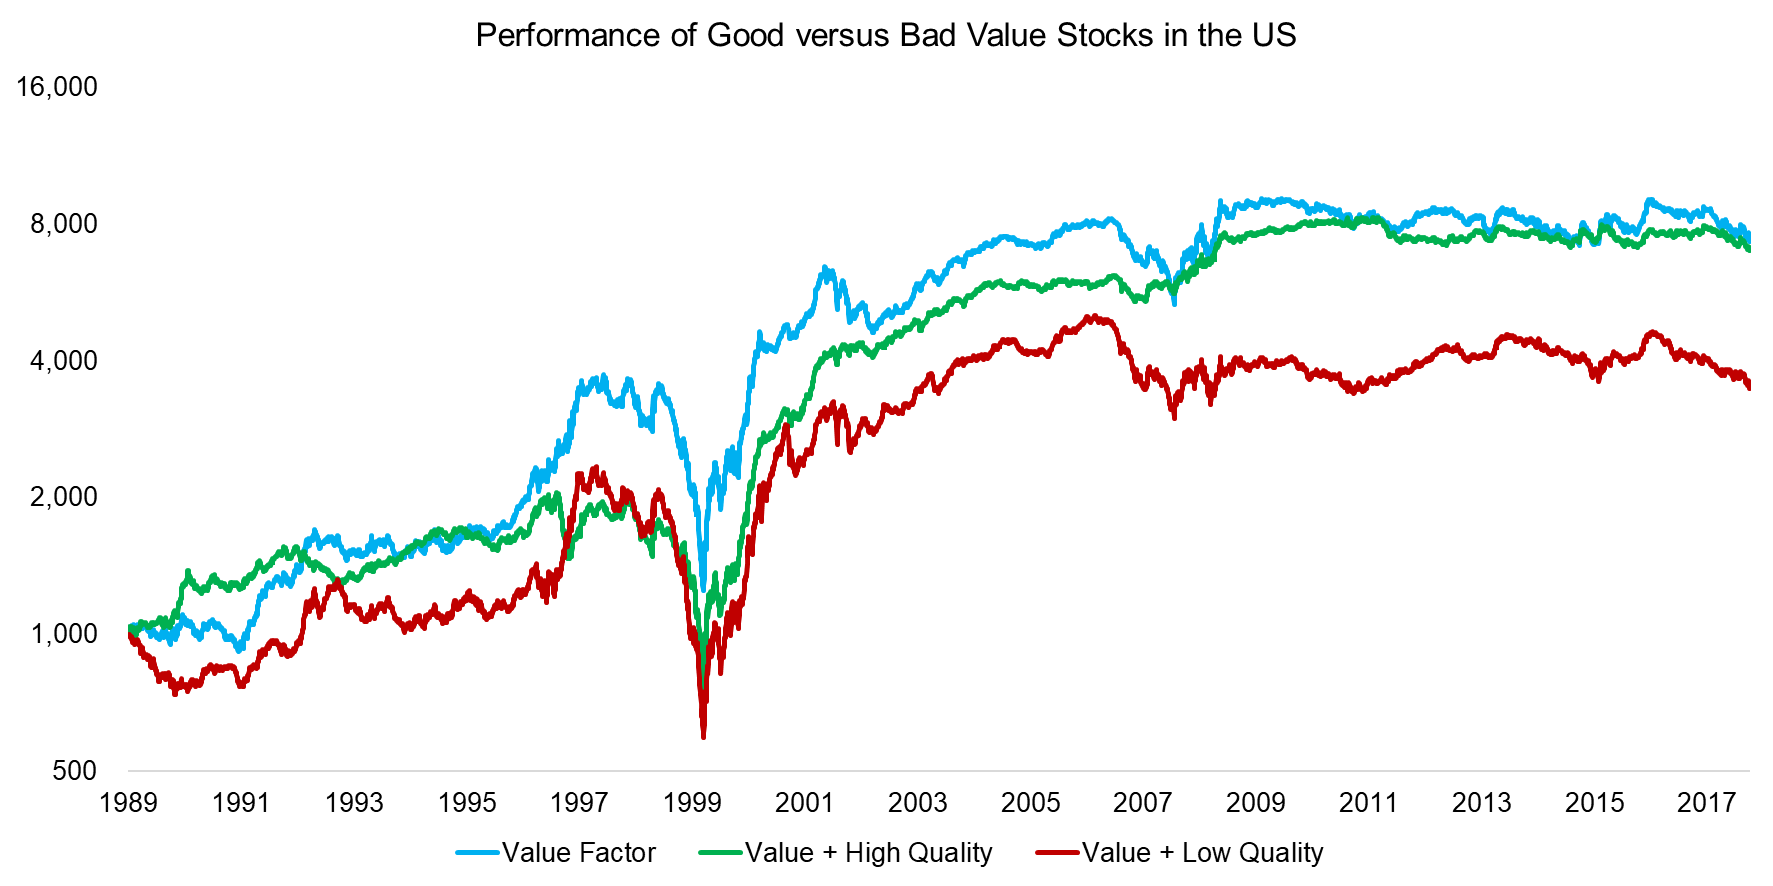 Performance of Good versus Bad Value Stocks in the US